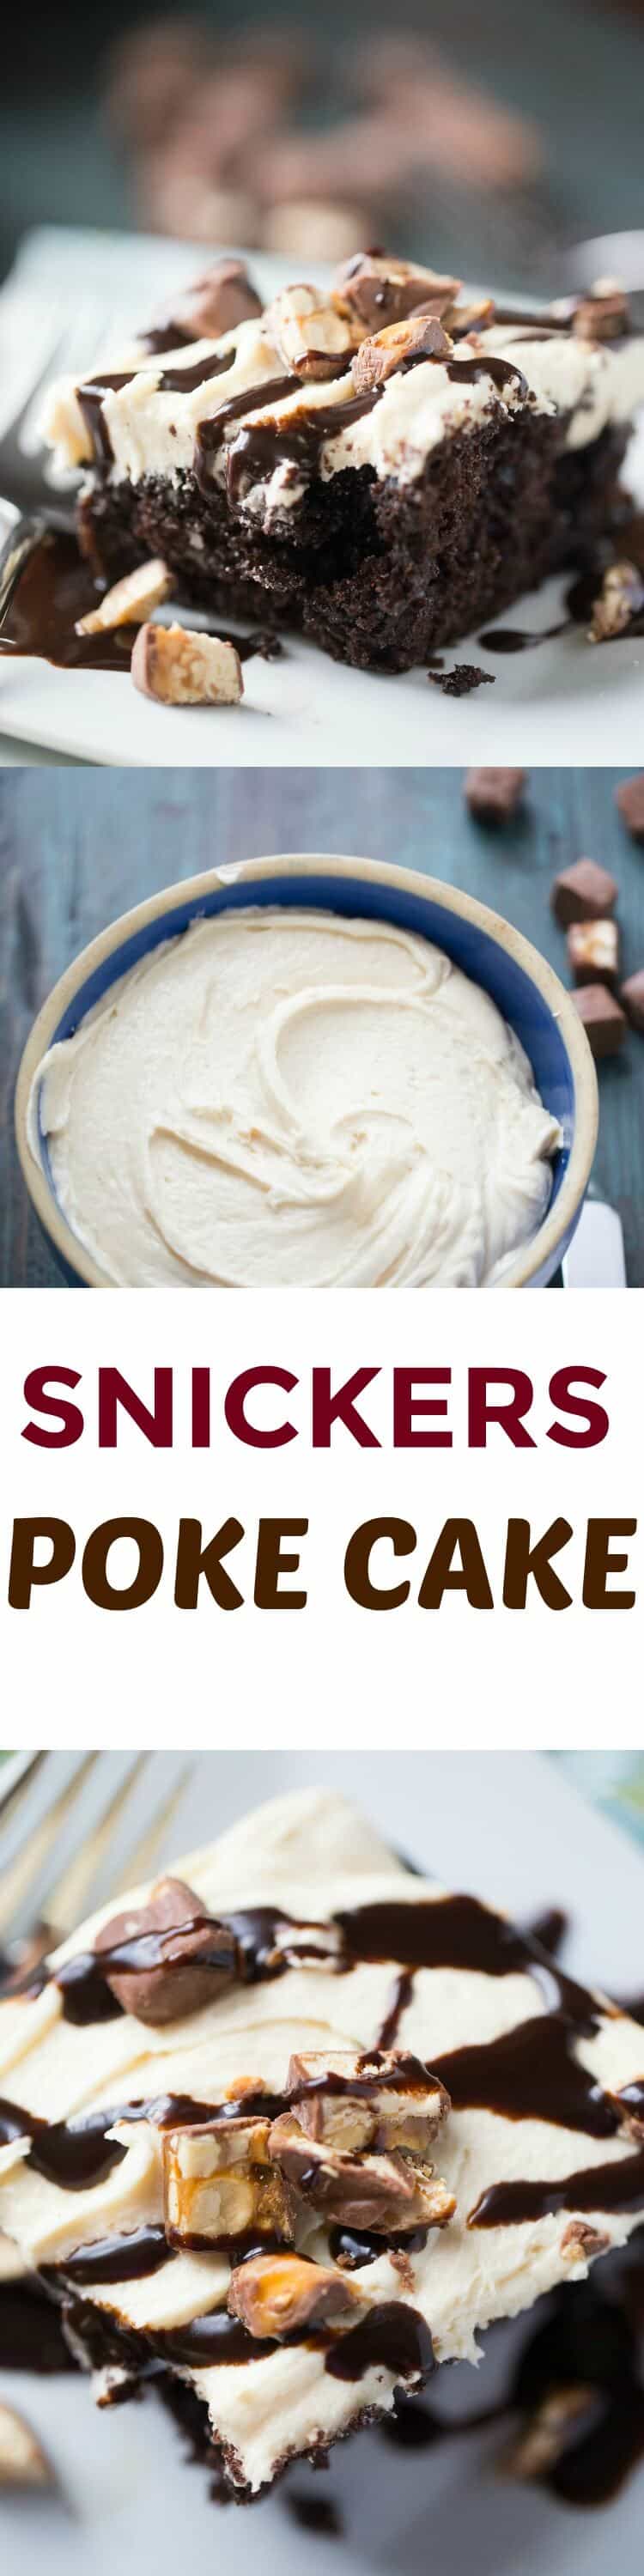 Snickers Poke Cake starts with chocolate cake and caramel sauce that is topped with frosting and candy! This is a dessert no one will pass up!